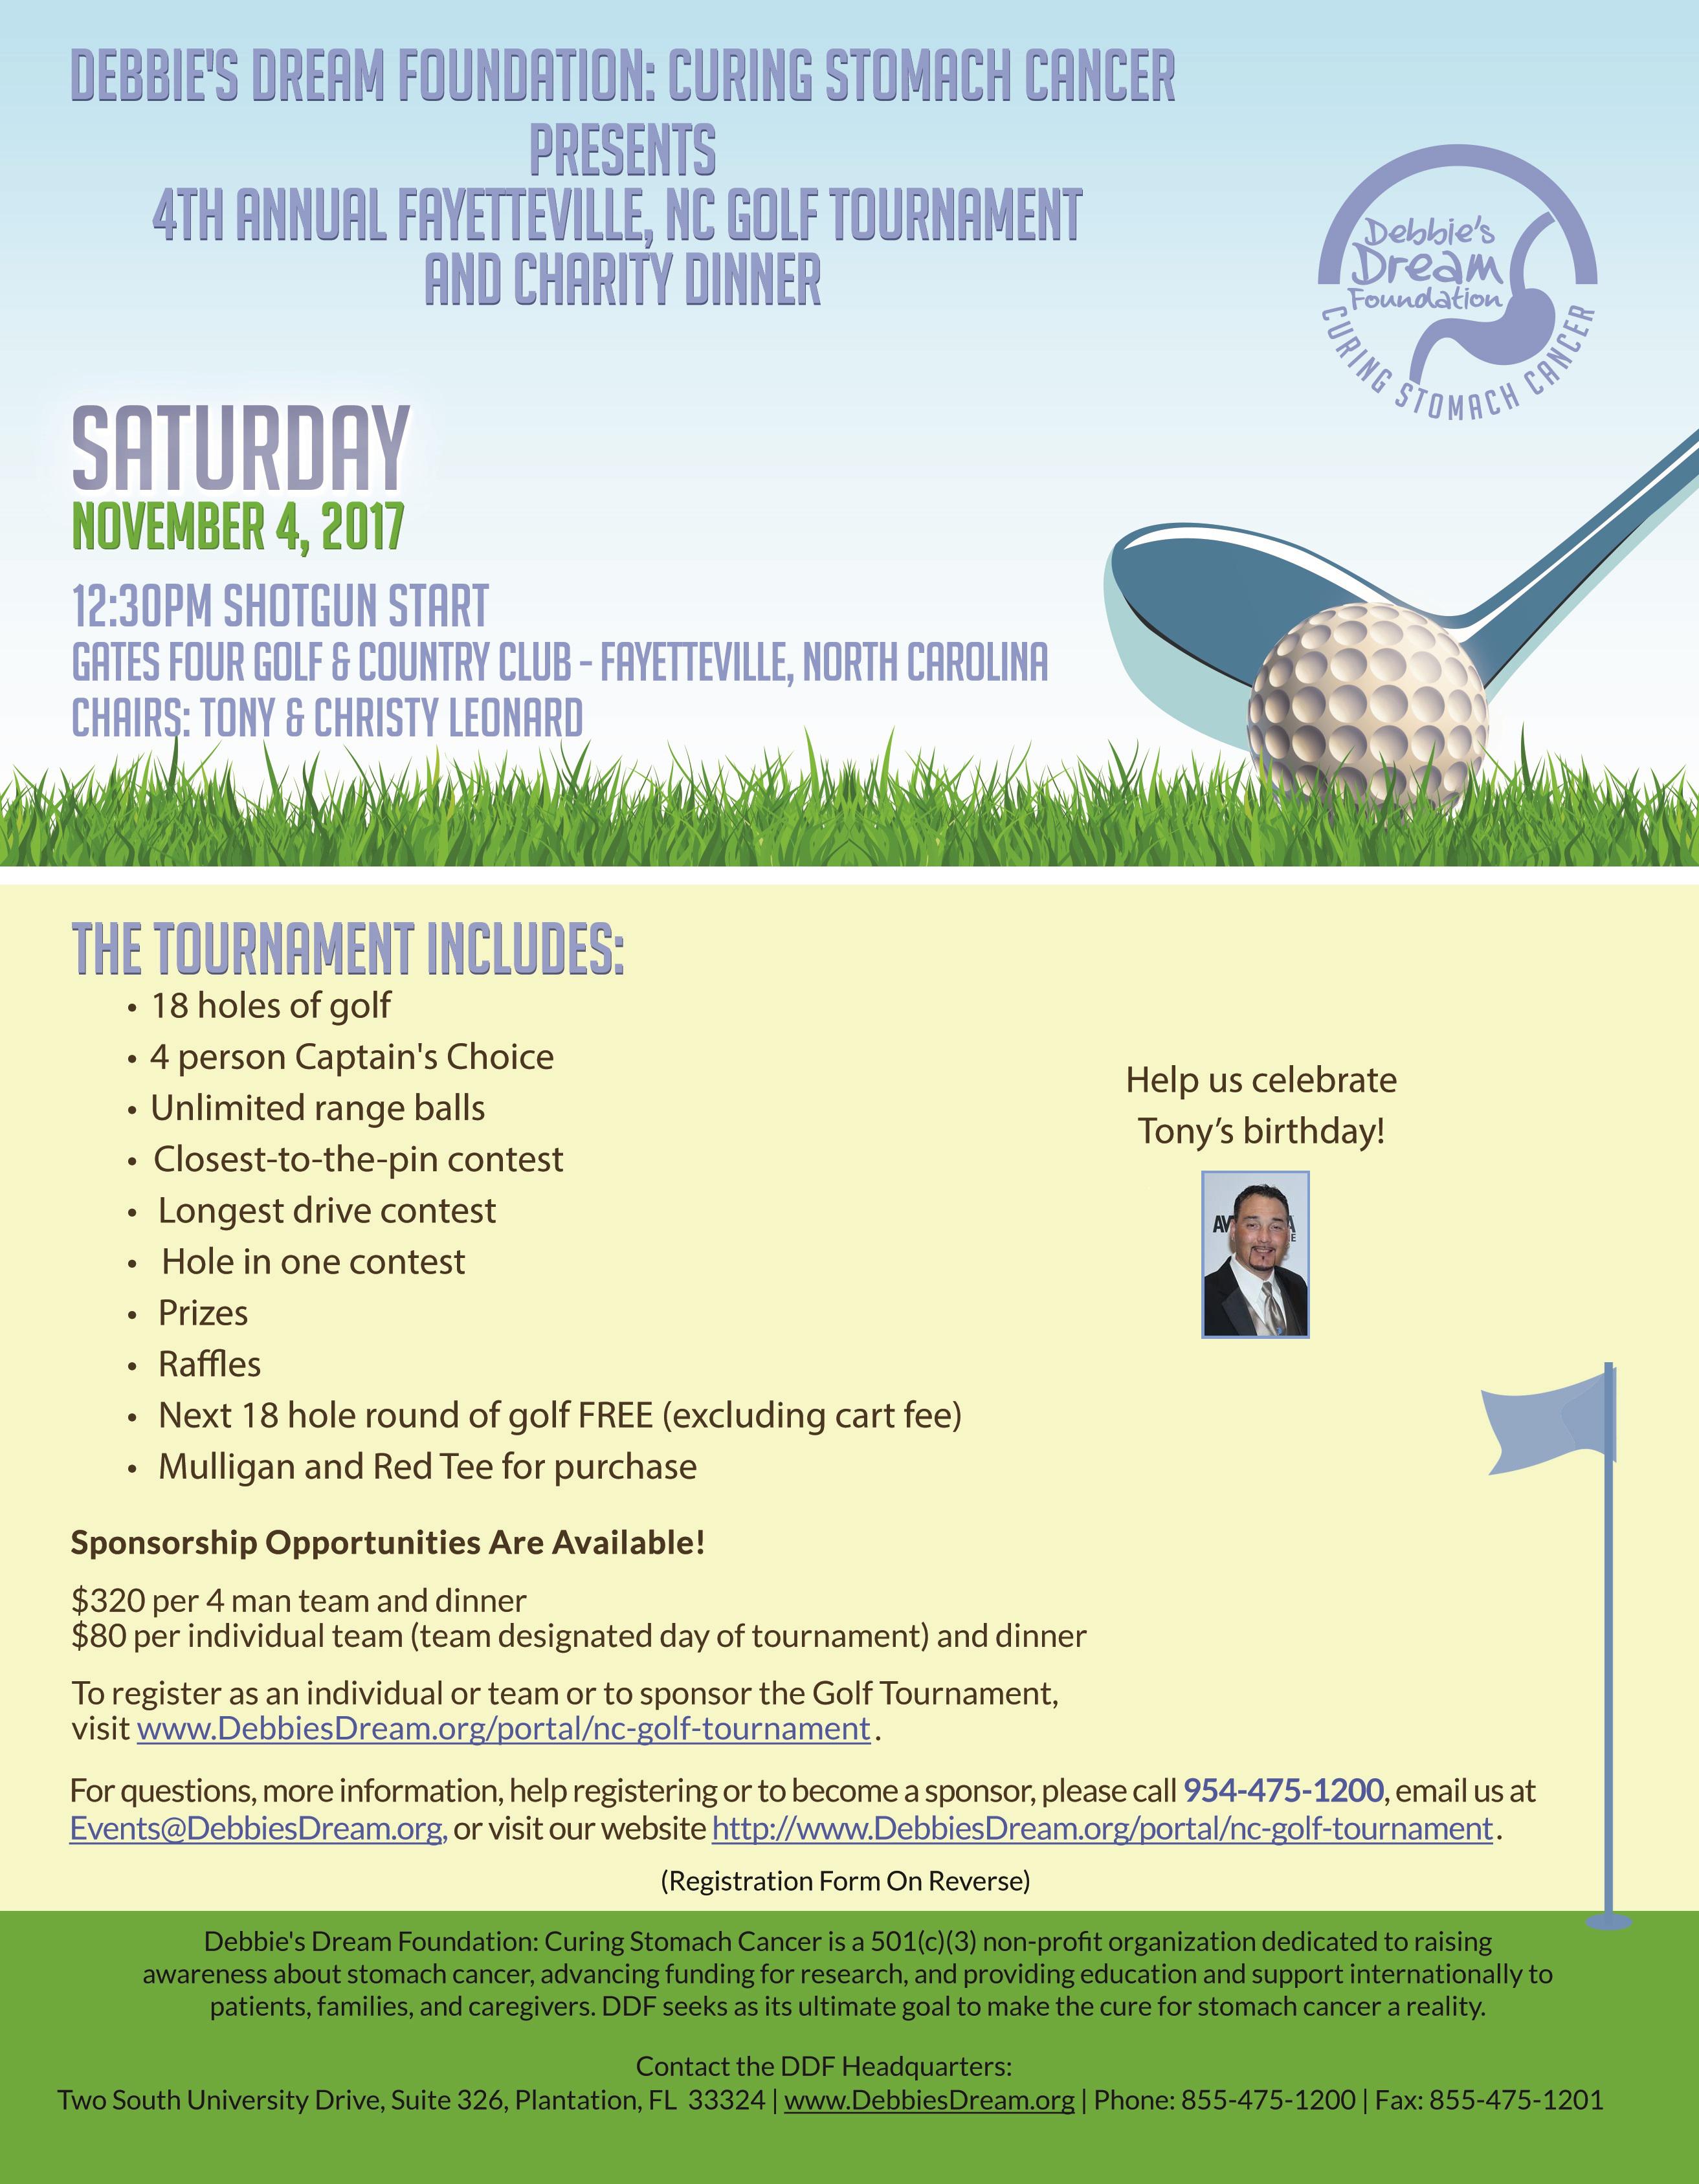 4th Annual Fayetteville NC Golf Tournament and Charity Dinner